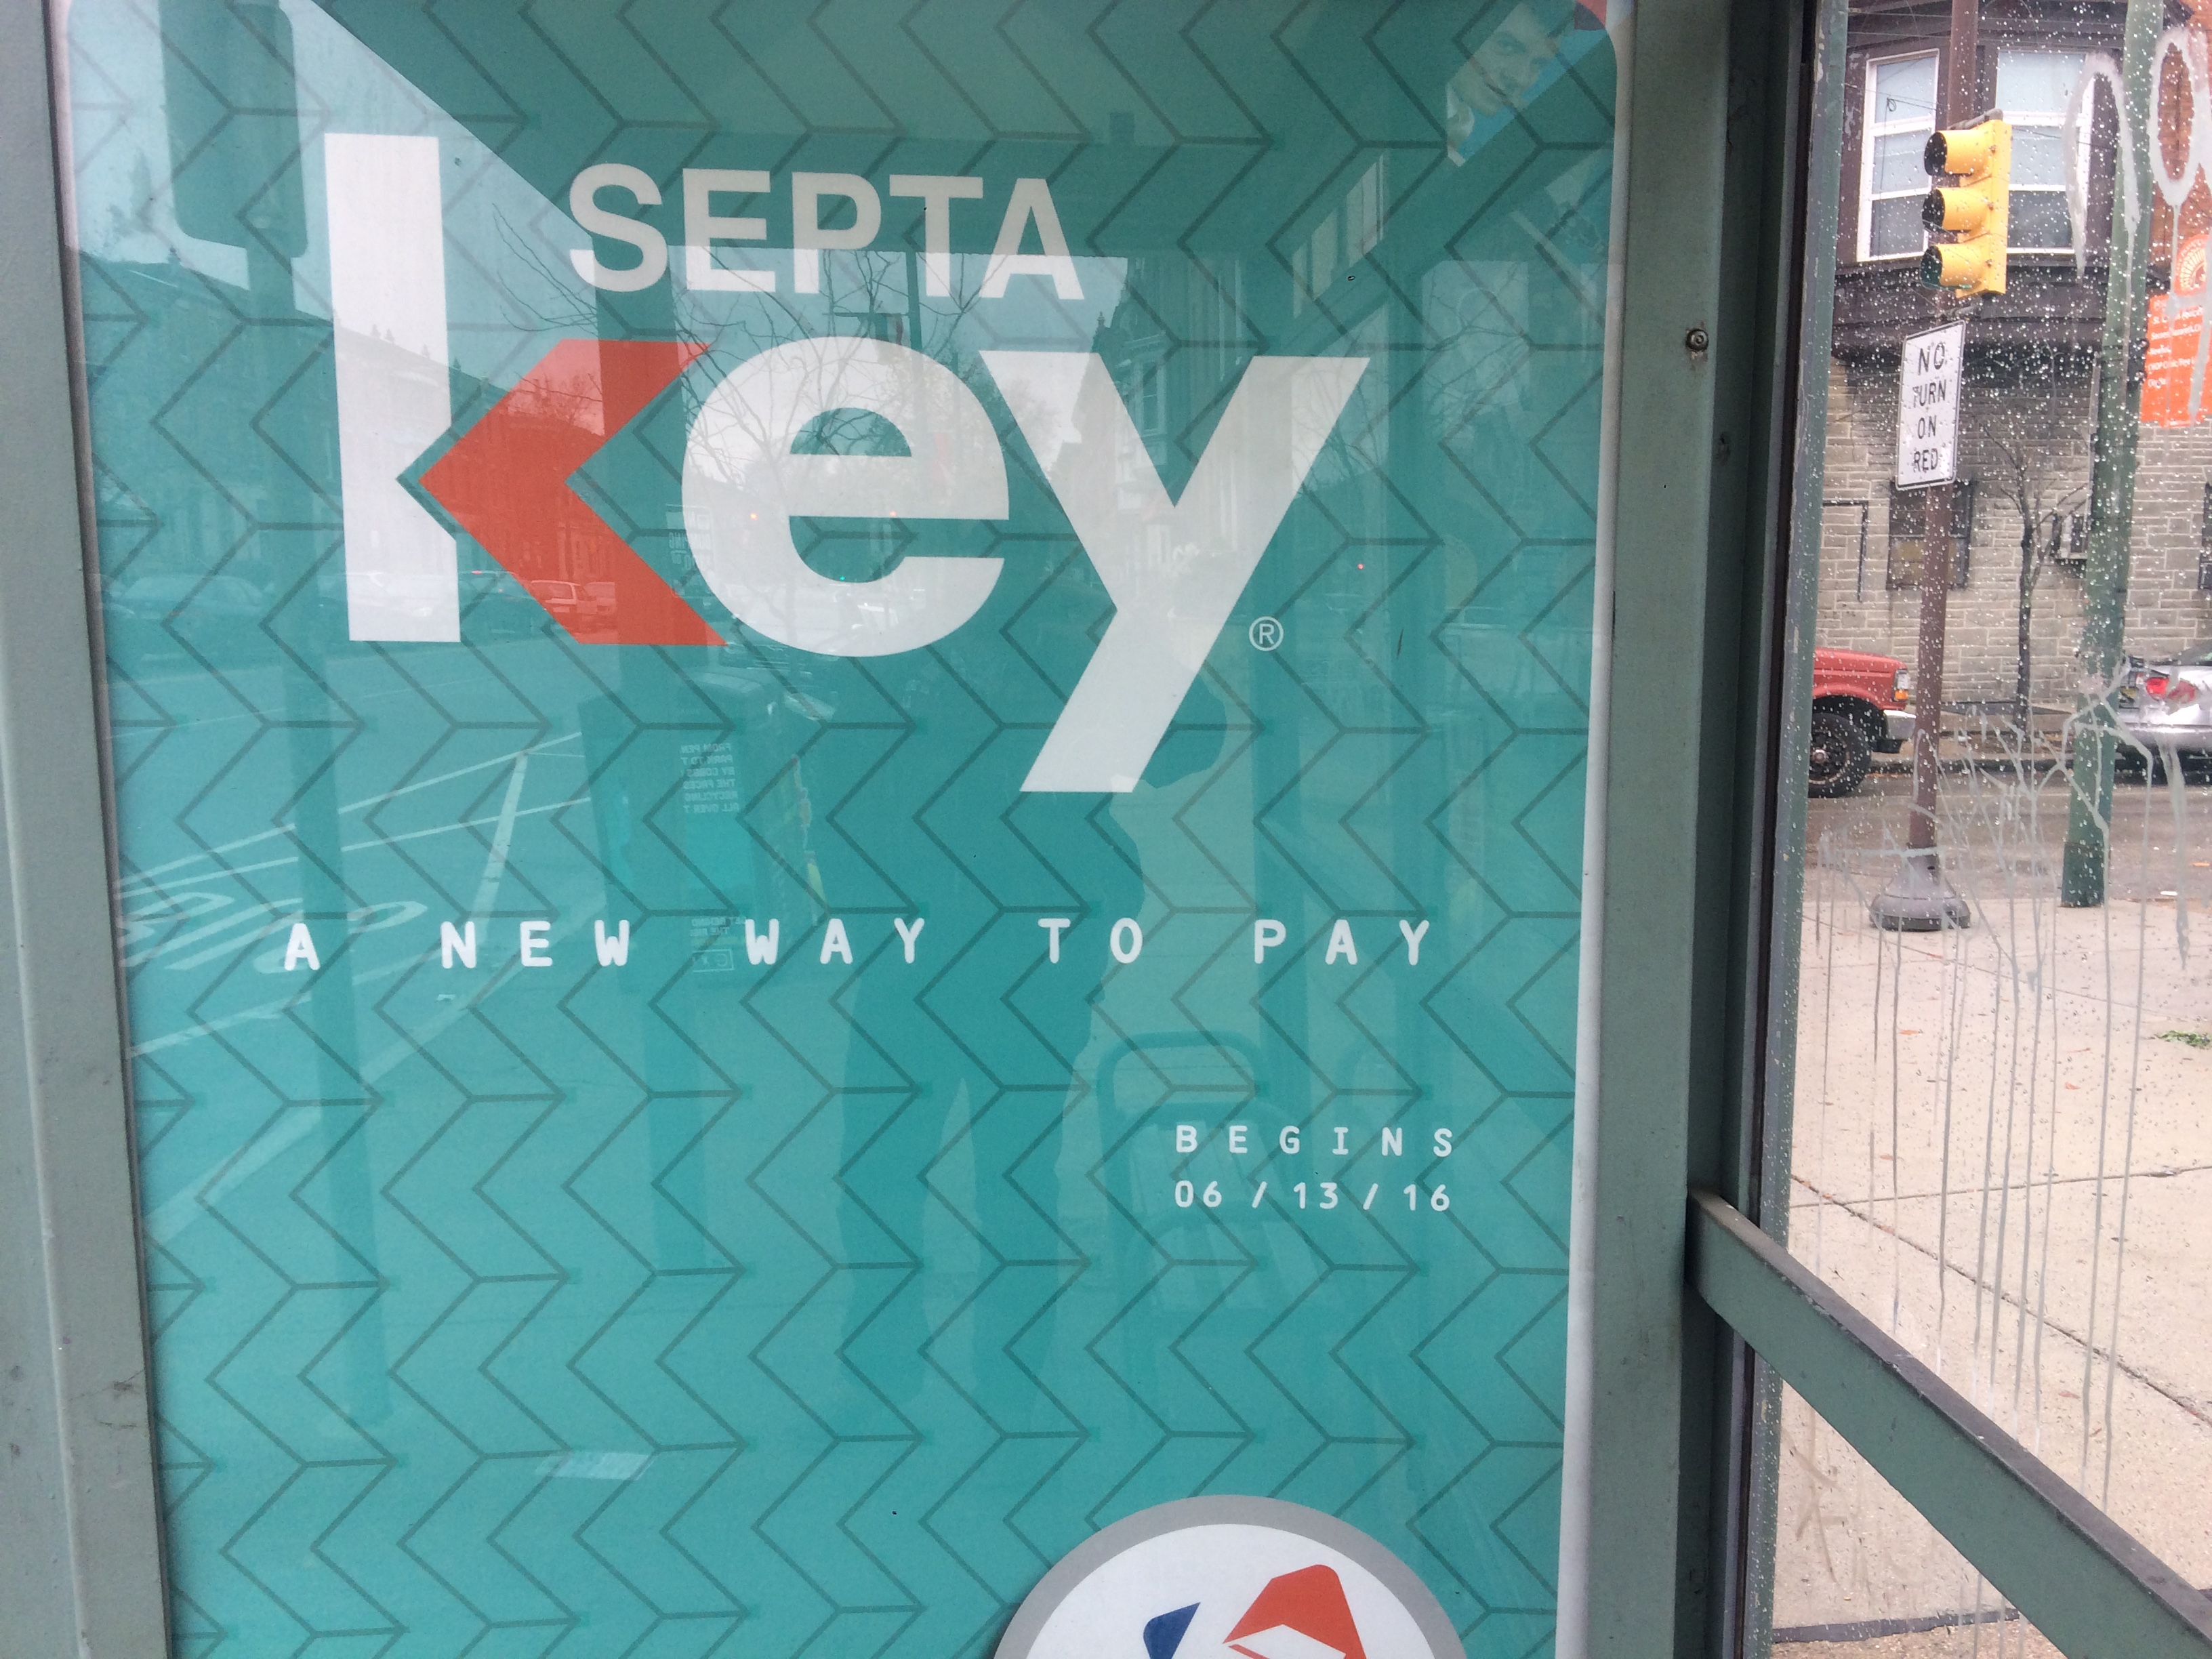 SEPTA Key bus shelter ad suggesting the new way to pay began on June 13th, 2016